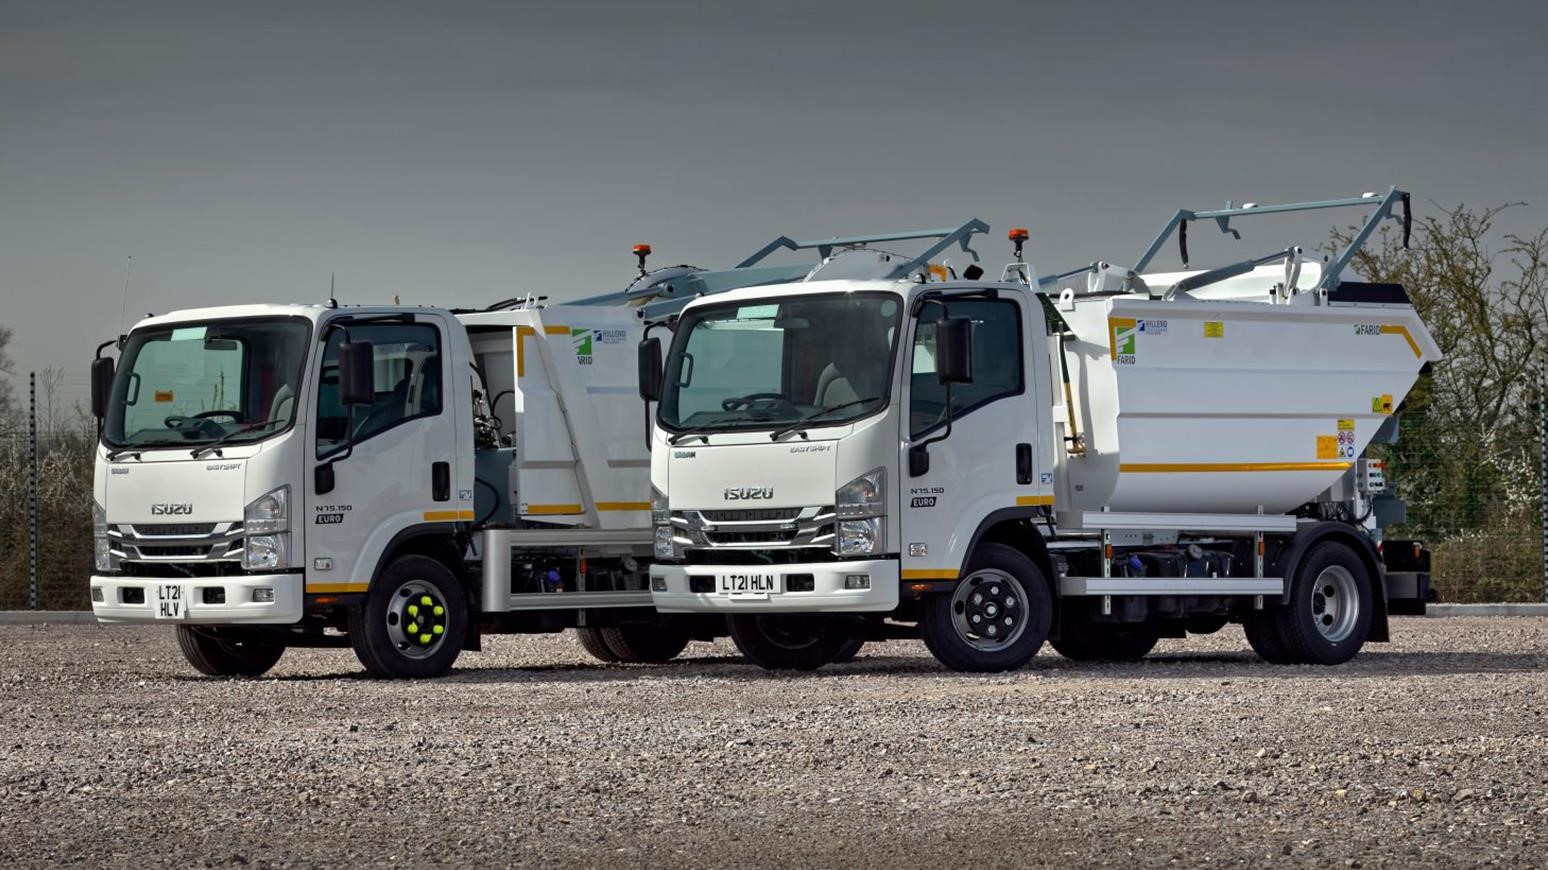 Dawsongroup Sweepers Expanding Cleaning Services With New Isuzu 7.5-tonne Trucks